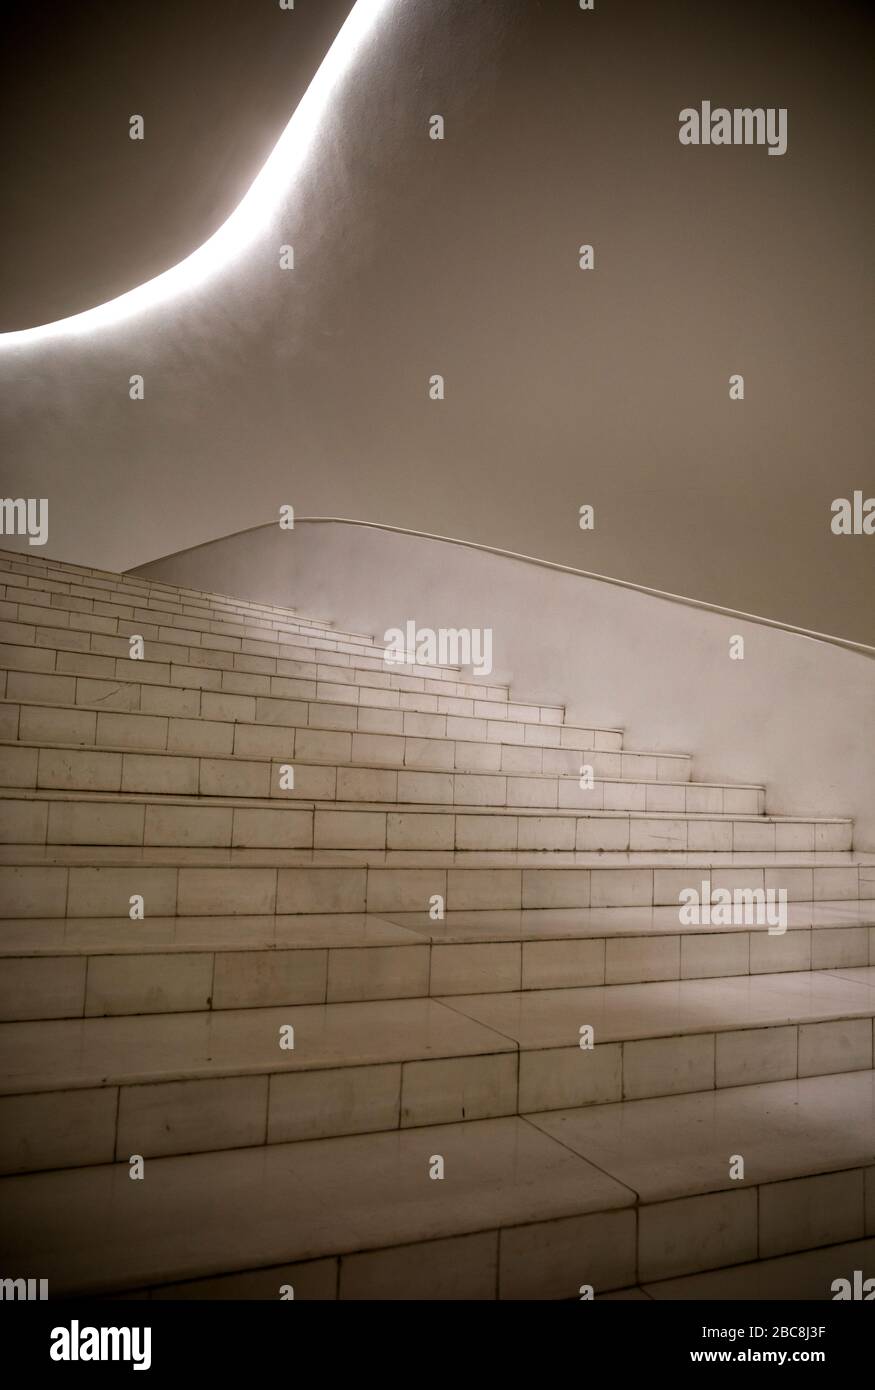 steps leading up to a light source Stock Photo